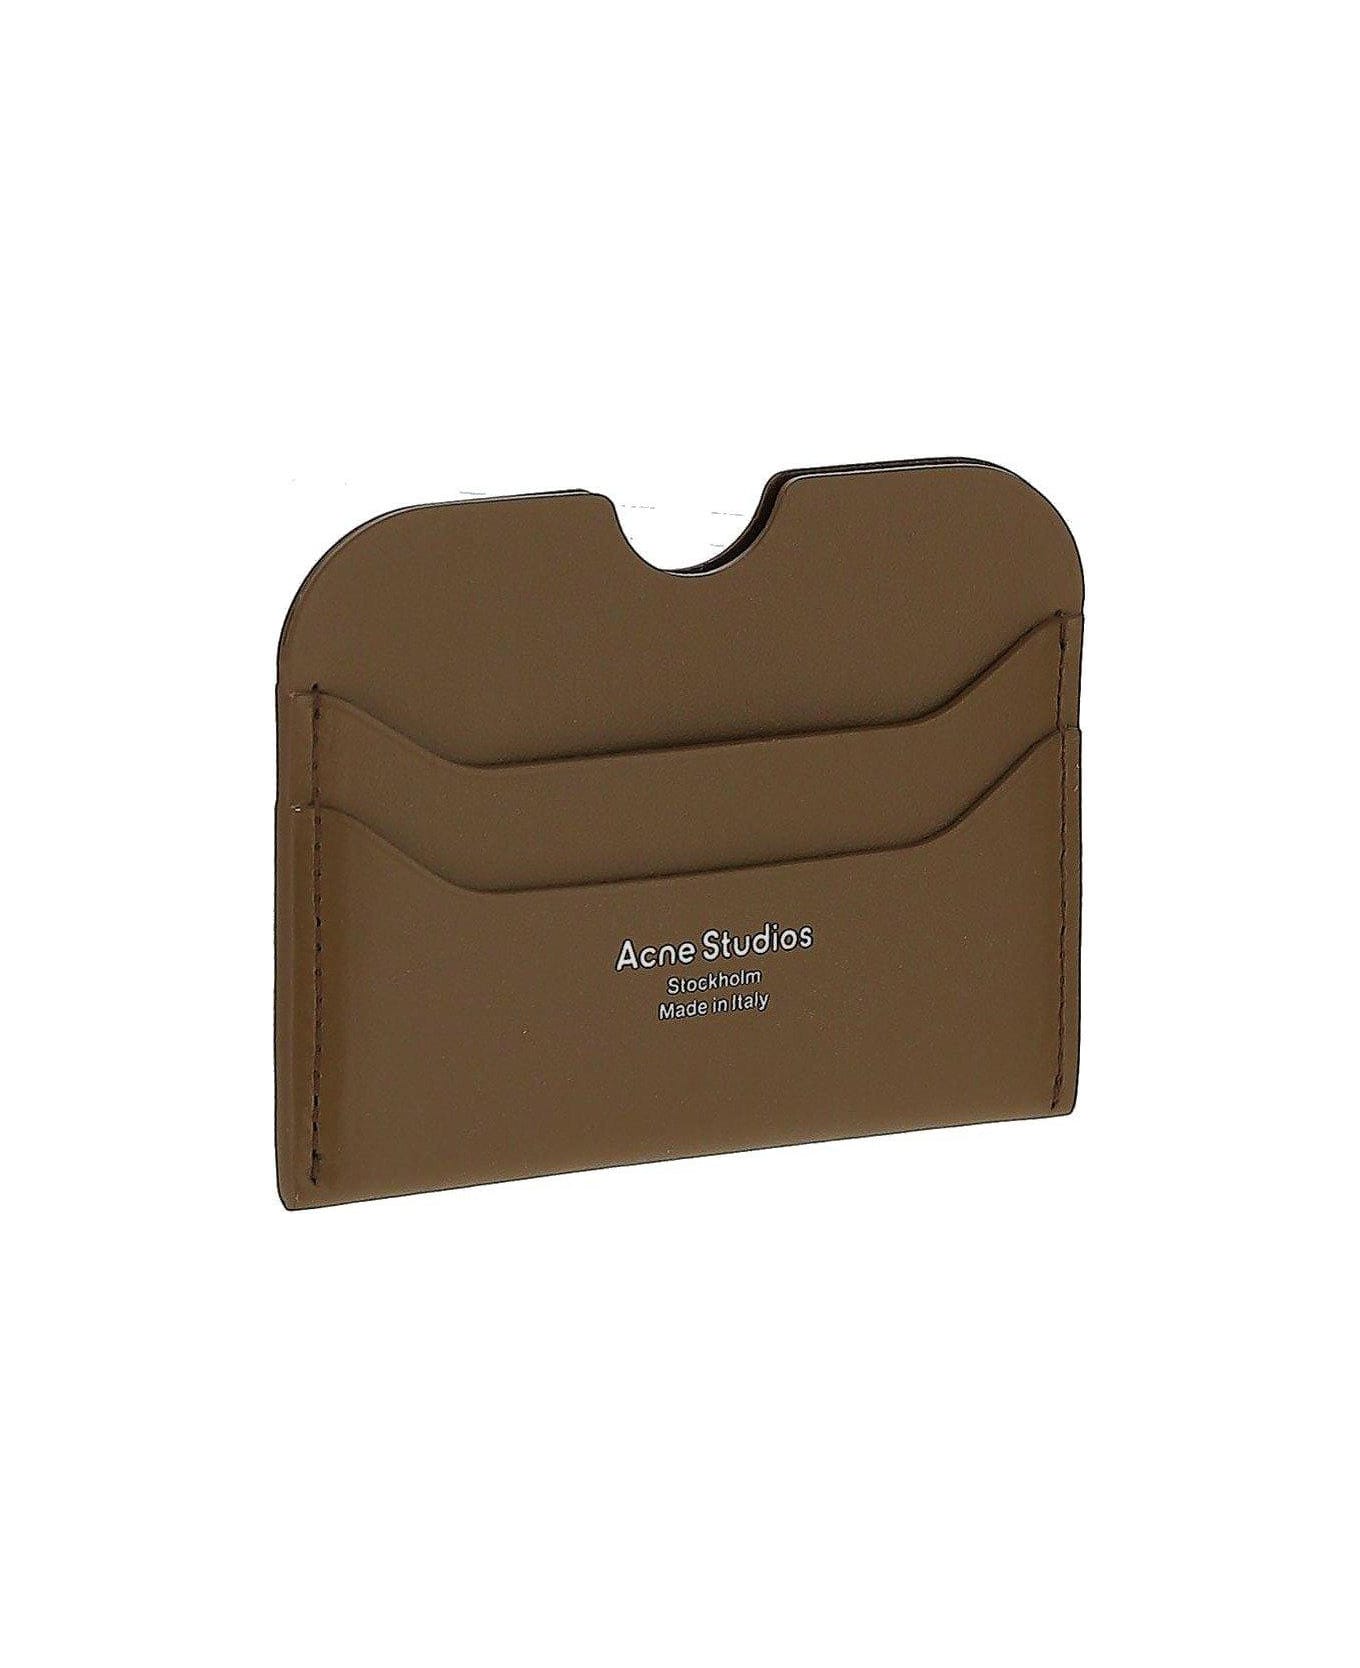 Acne Studios Logo Printed Cut-out Detailed Cardholder - CAMEL BROWN 財布